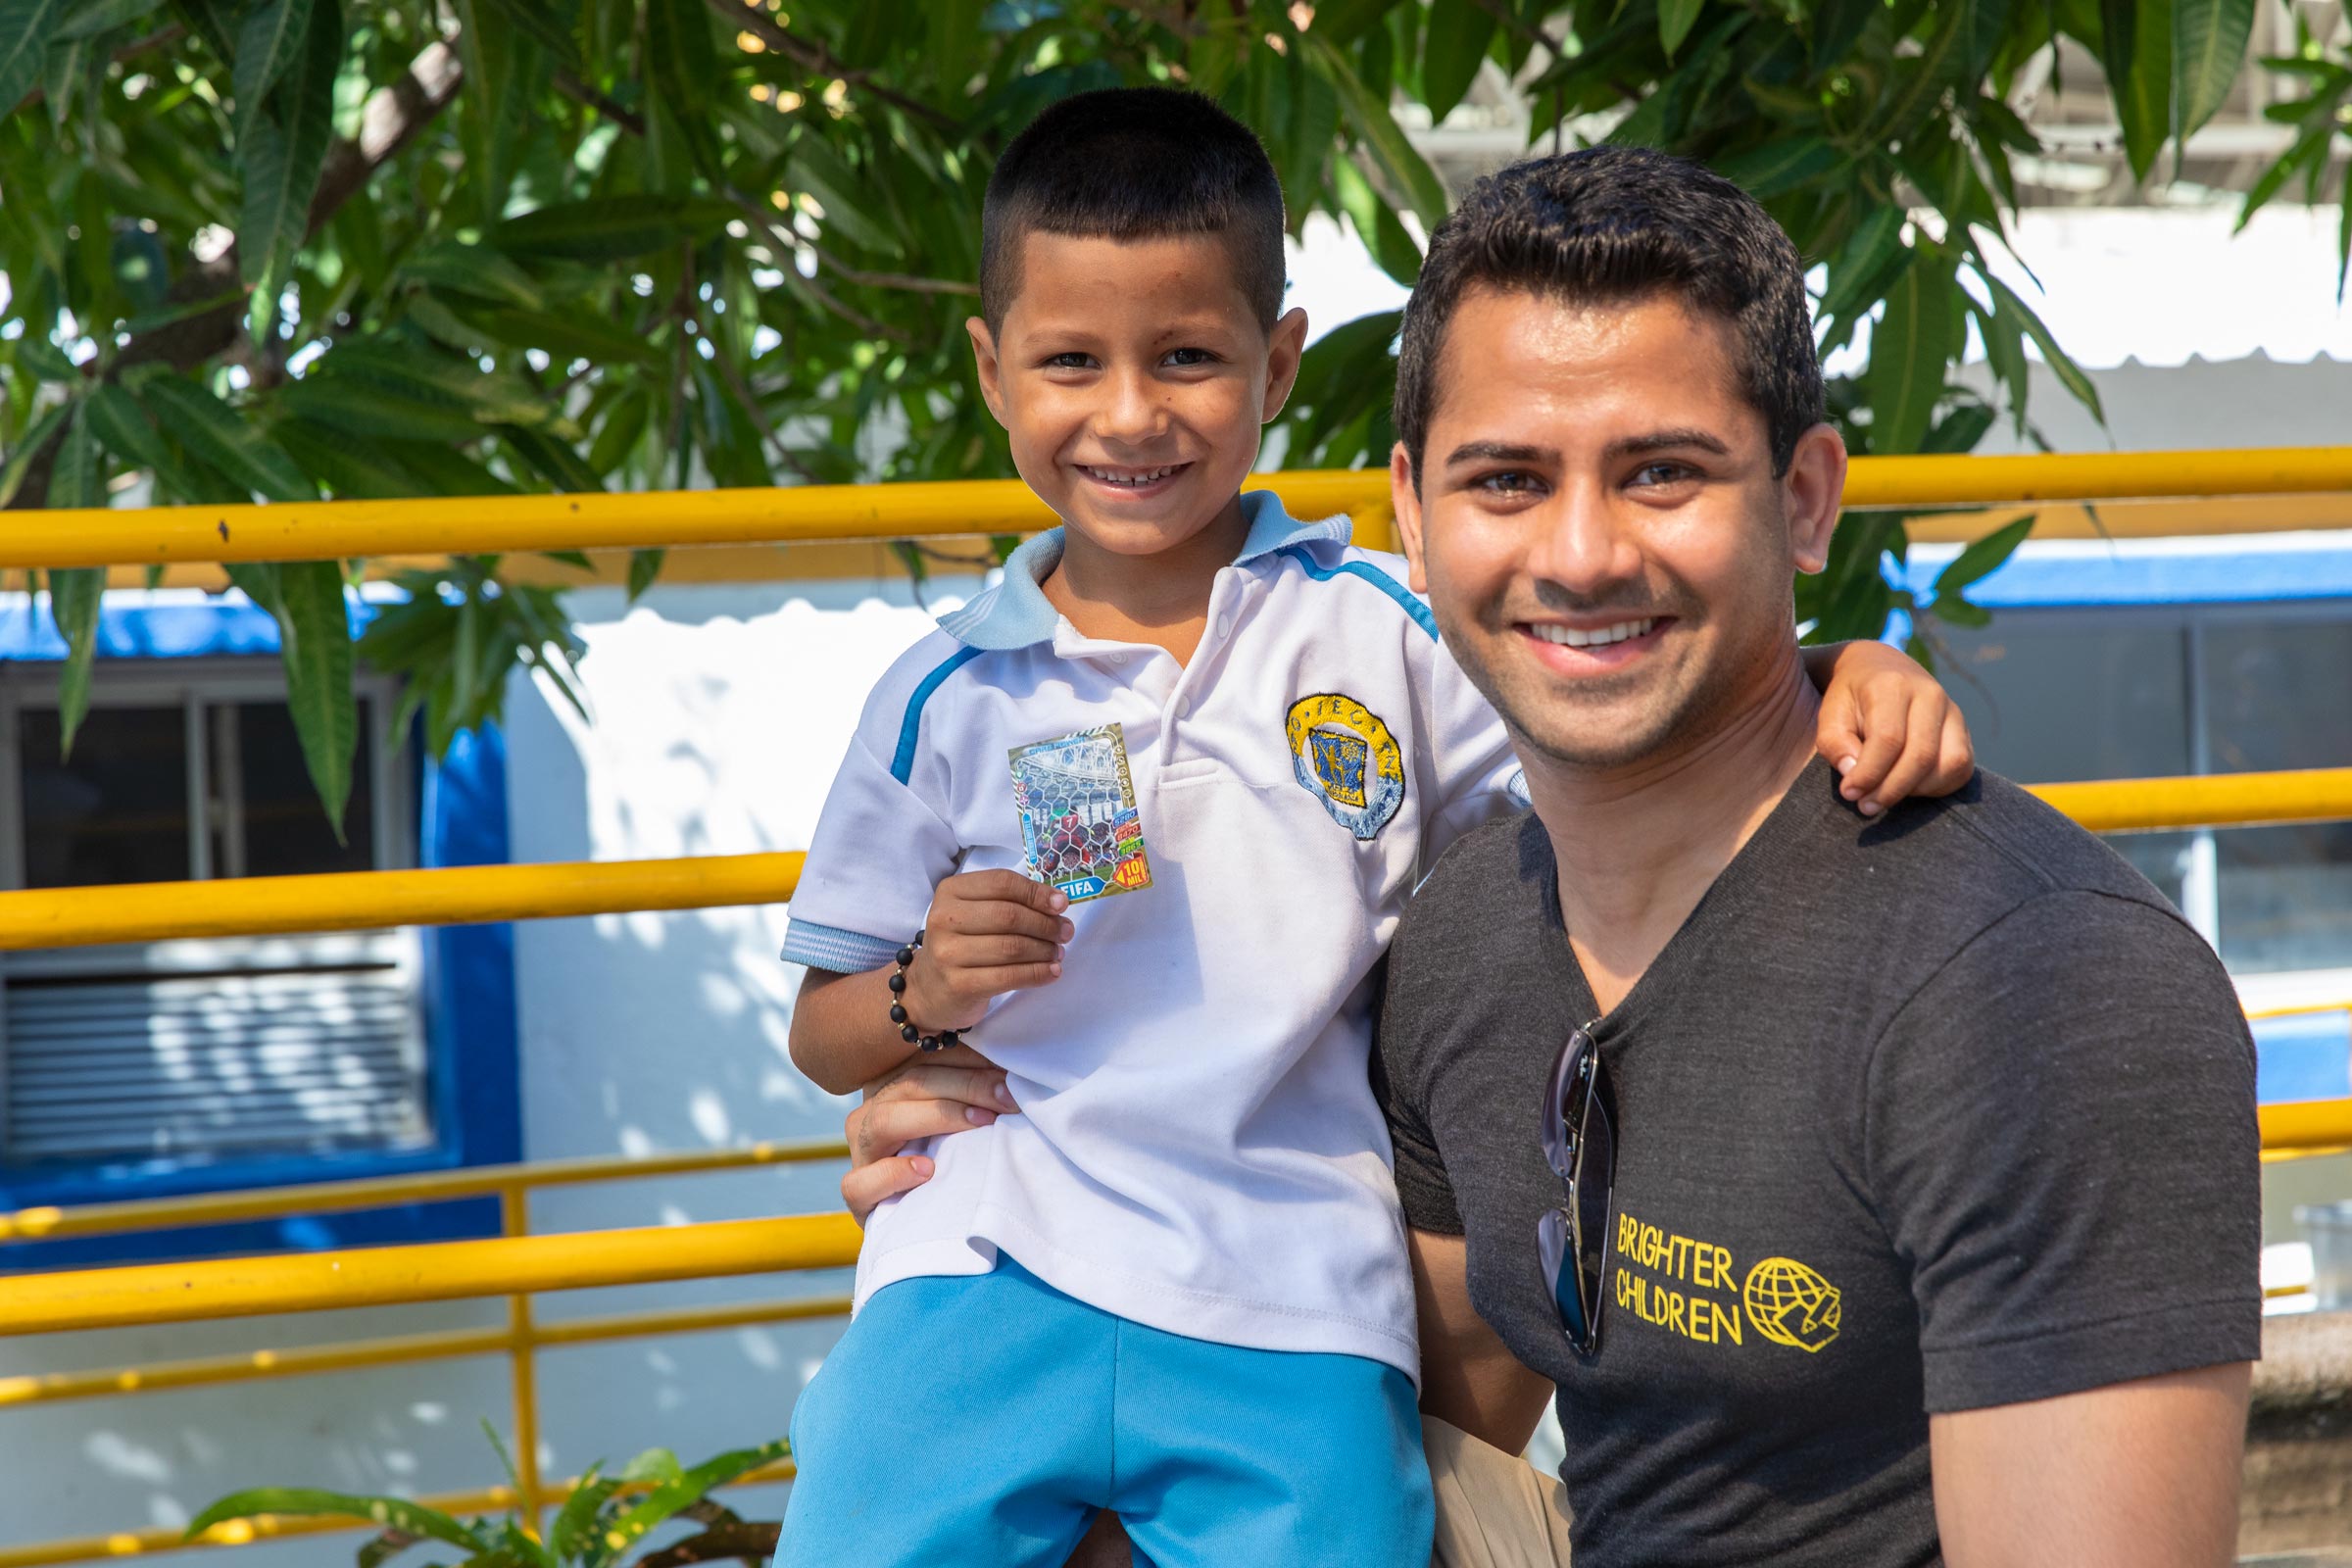 Kunal Doshi  with a student named Darlington pose together for a photo in Colombia